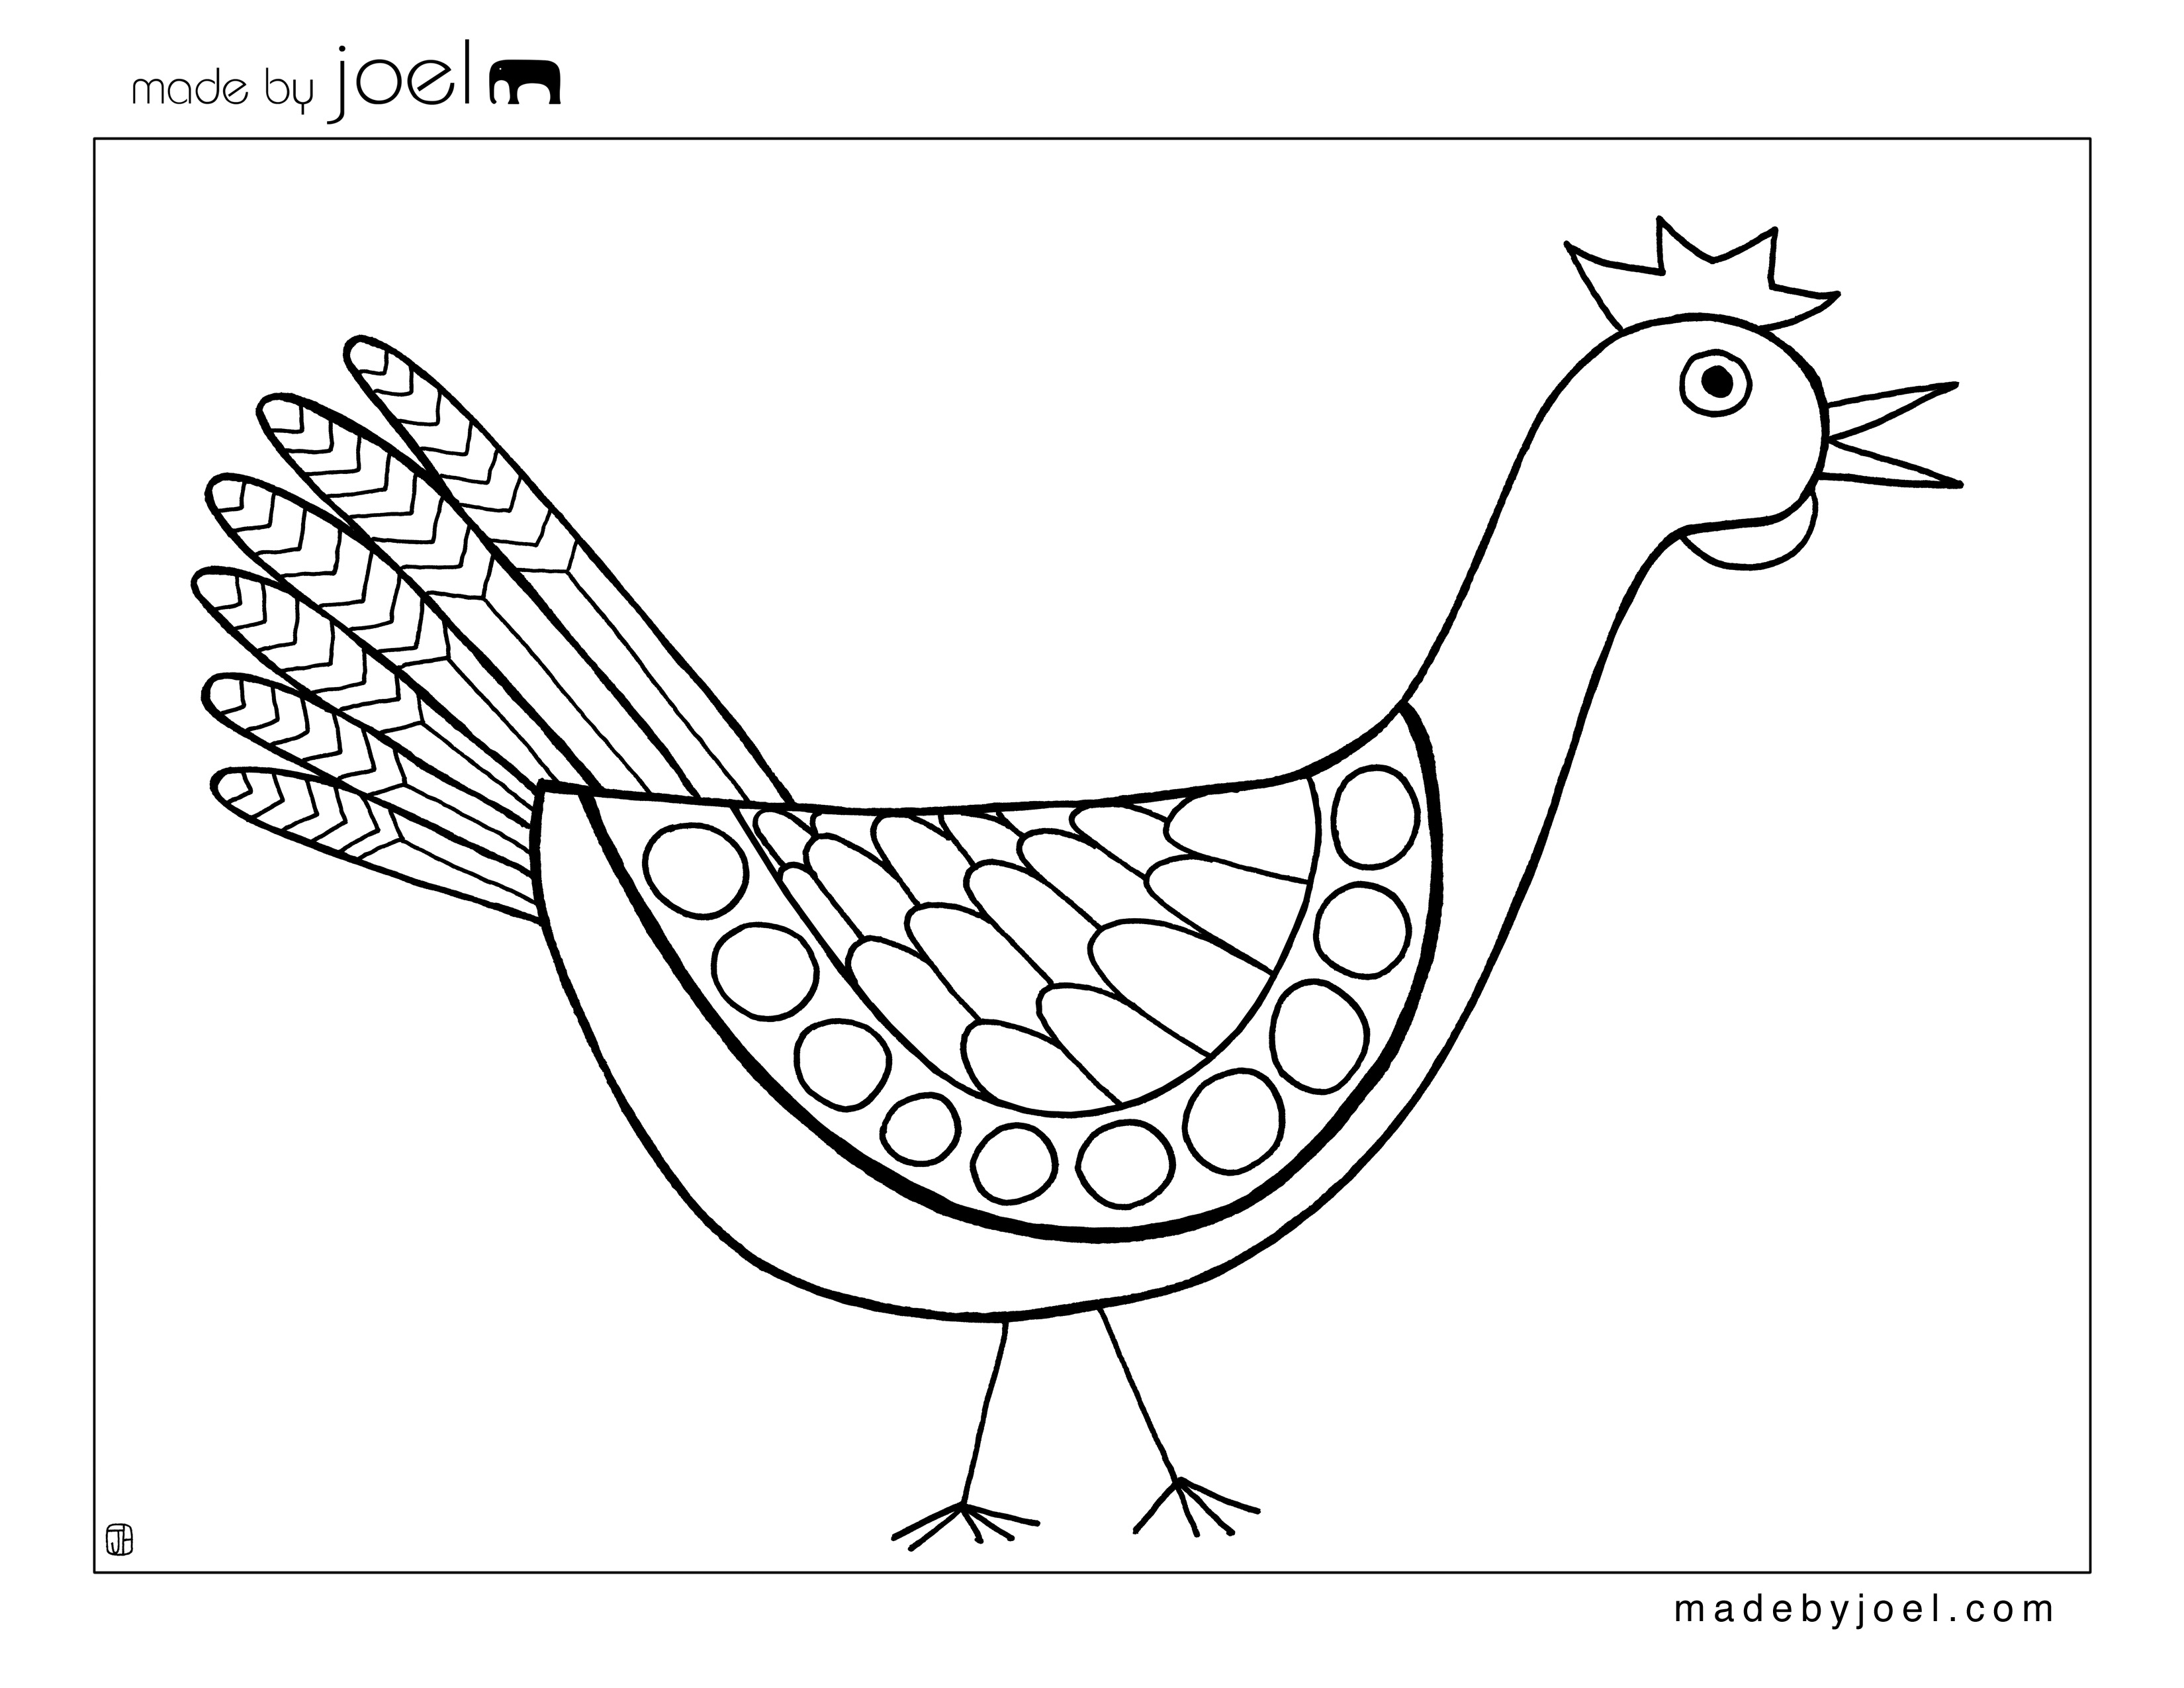 Made by Joel Coloring Sheet Kids Craft for Lori Henriques Music Video –  Made by Joel